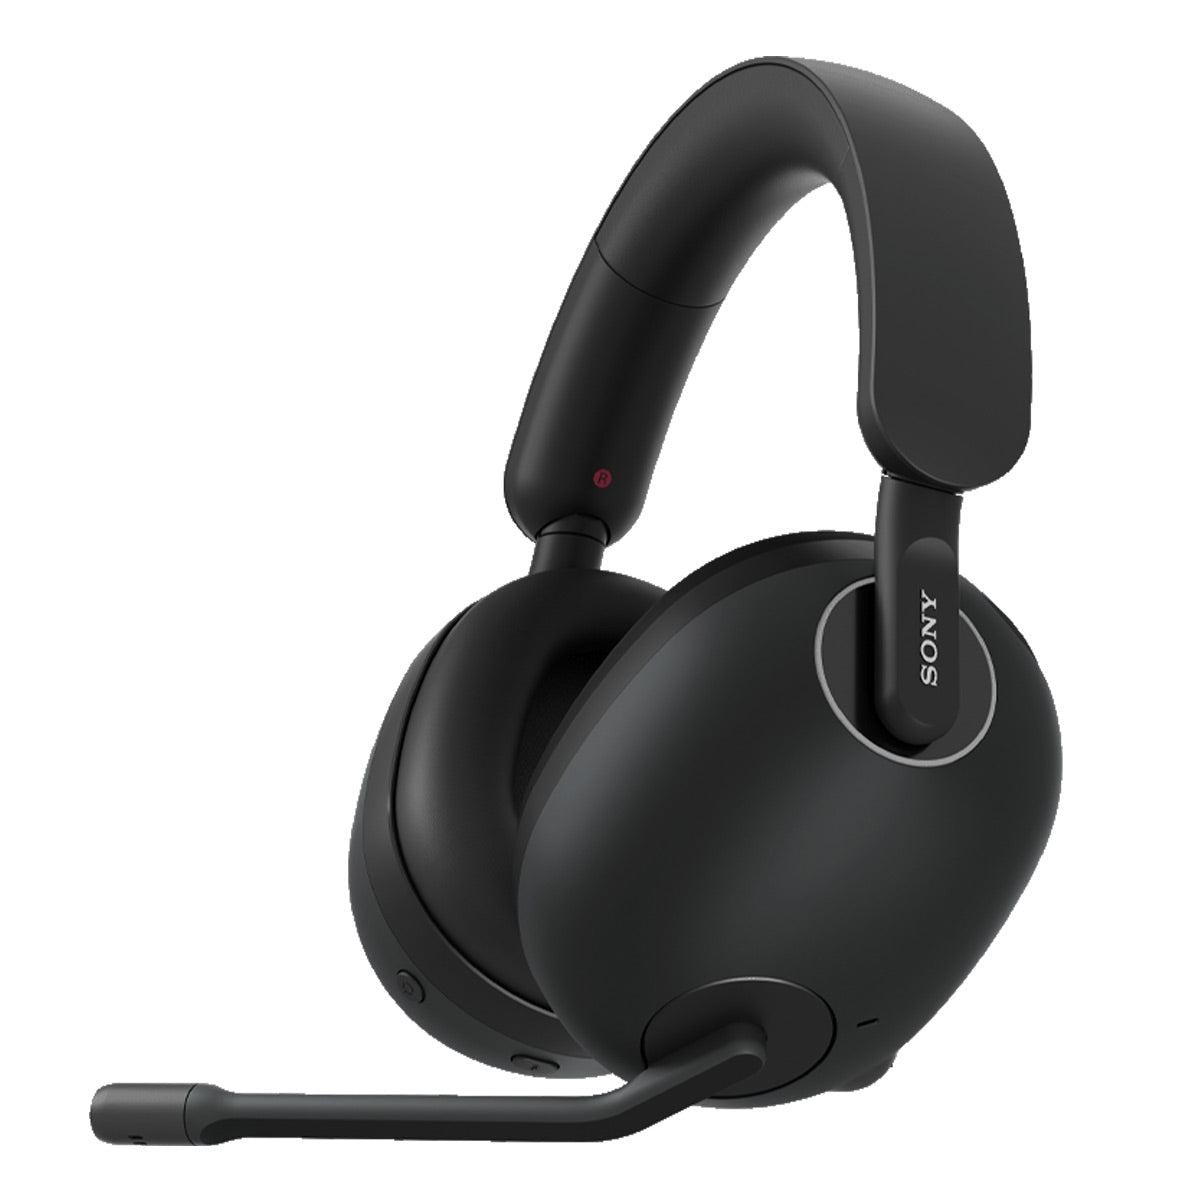 Sony INZONE H9 Wireless Noise Cancelling Gaming Headset (Black)